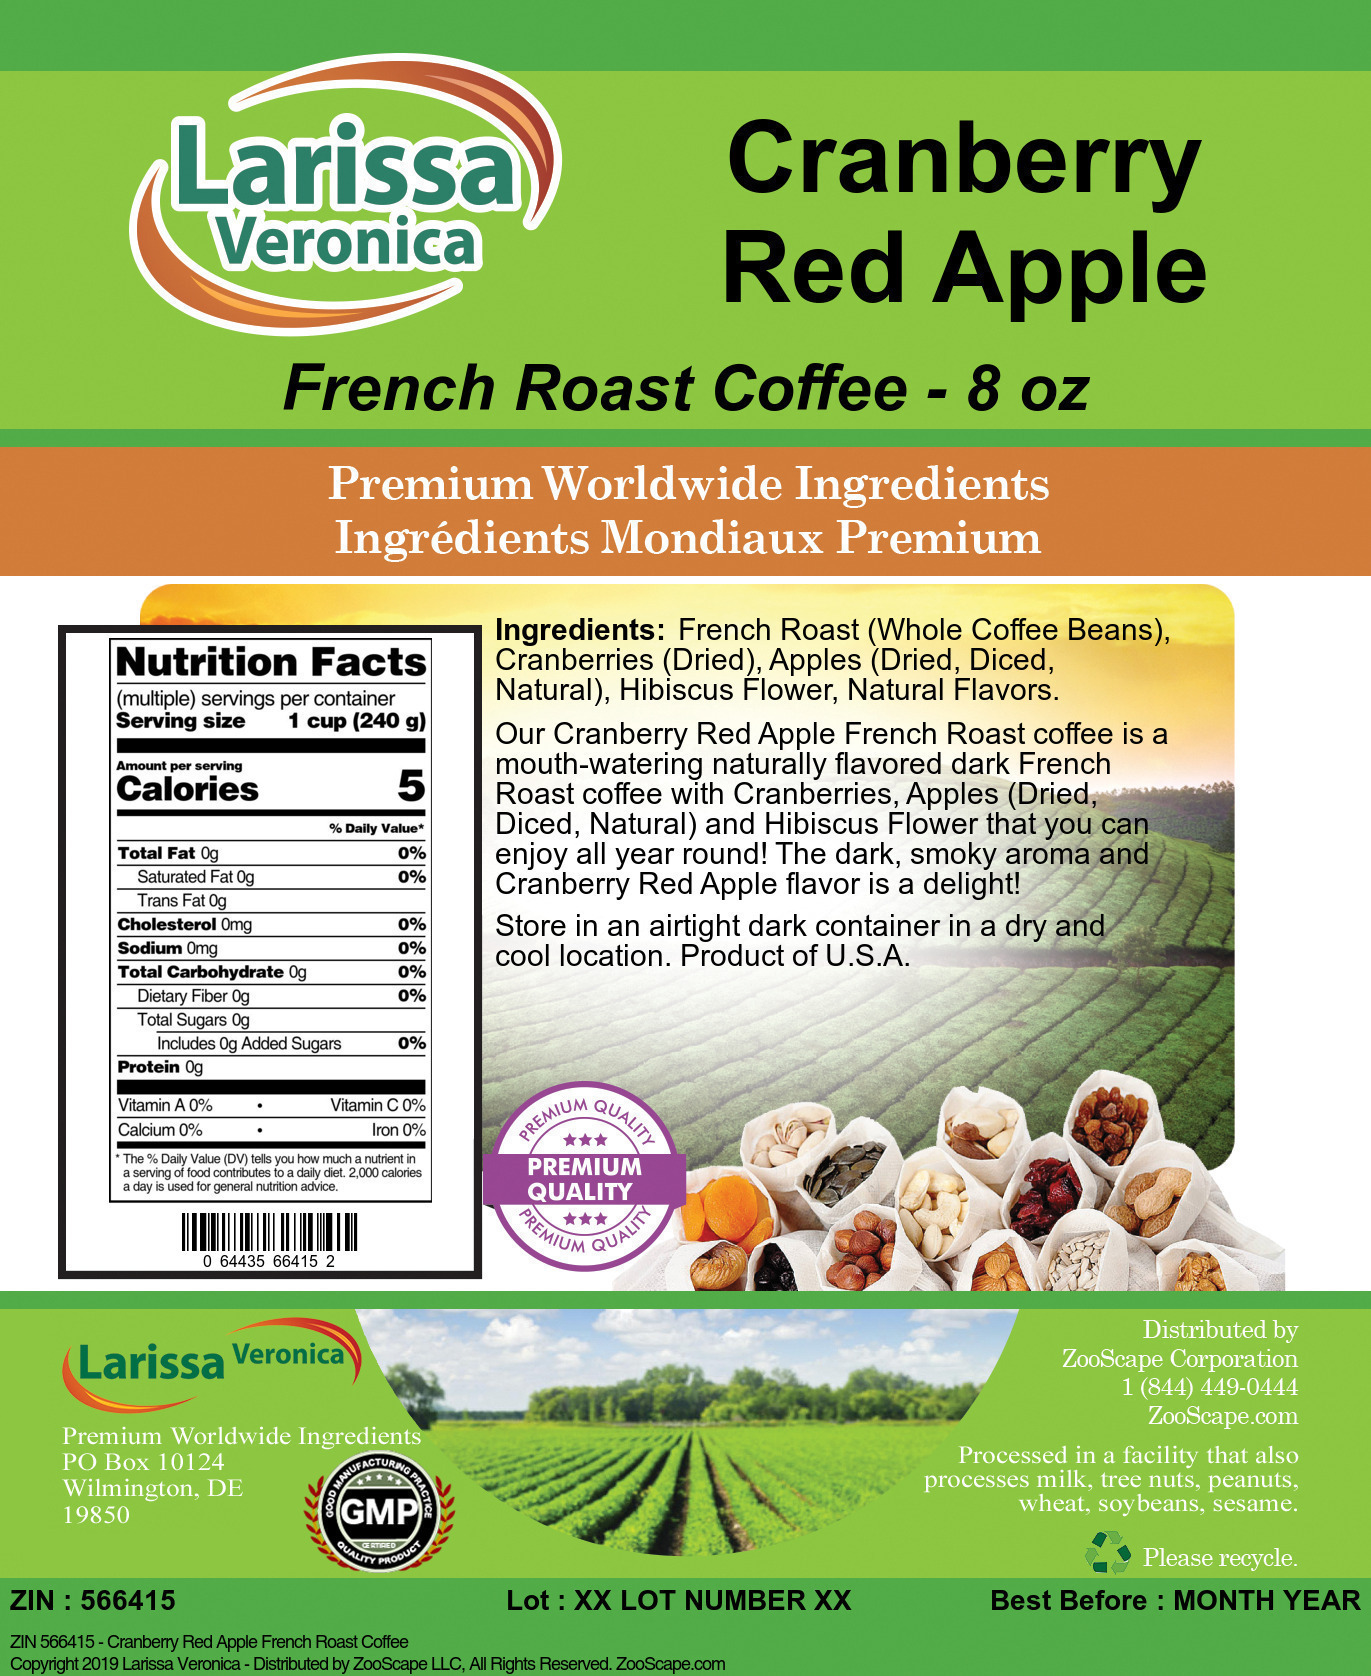 Cranberry Red Apple French Roast Coffee - Label